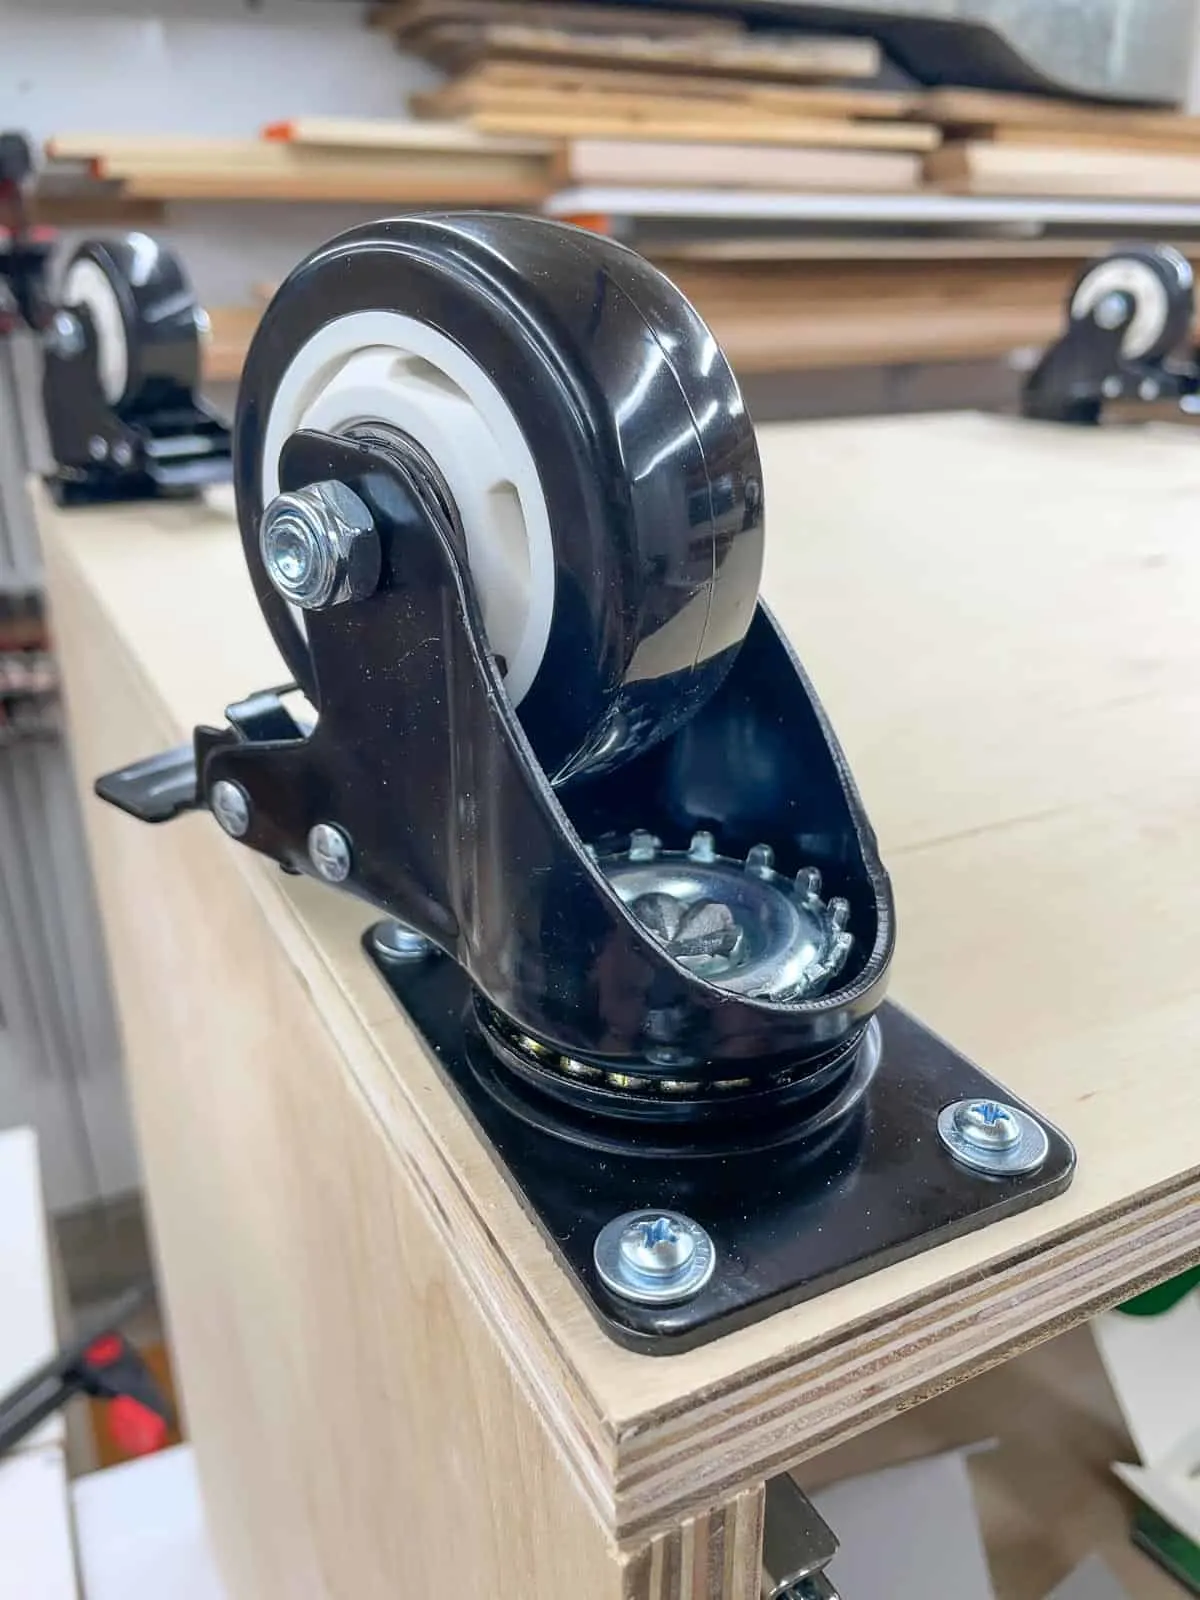 locking casters installed on router table bottom